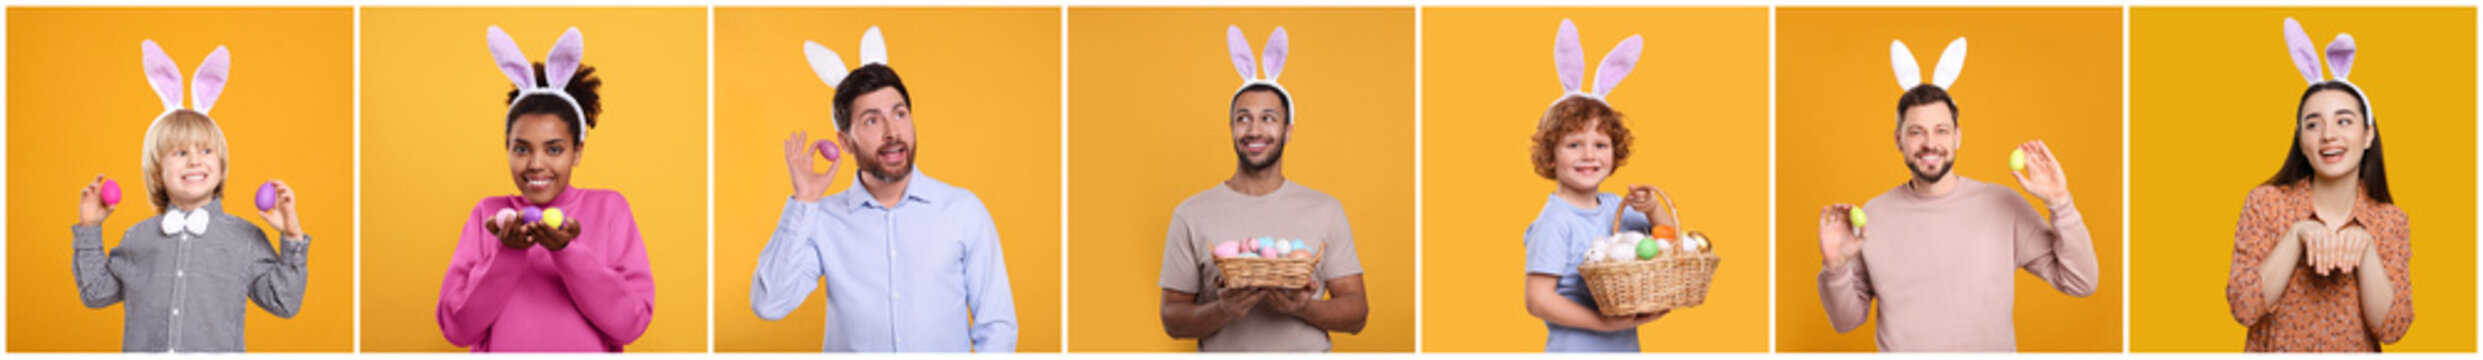 Easter celebration. Collage with photos of people in bunny ears headbands on orange background